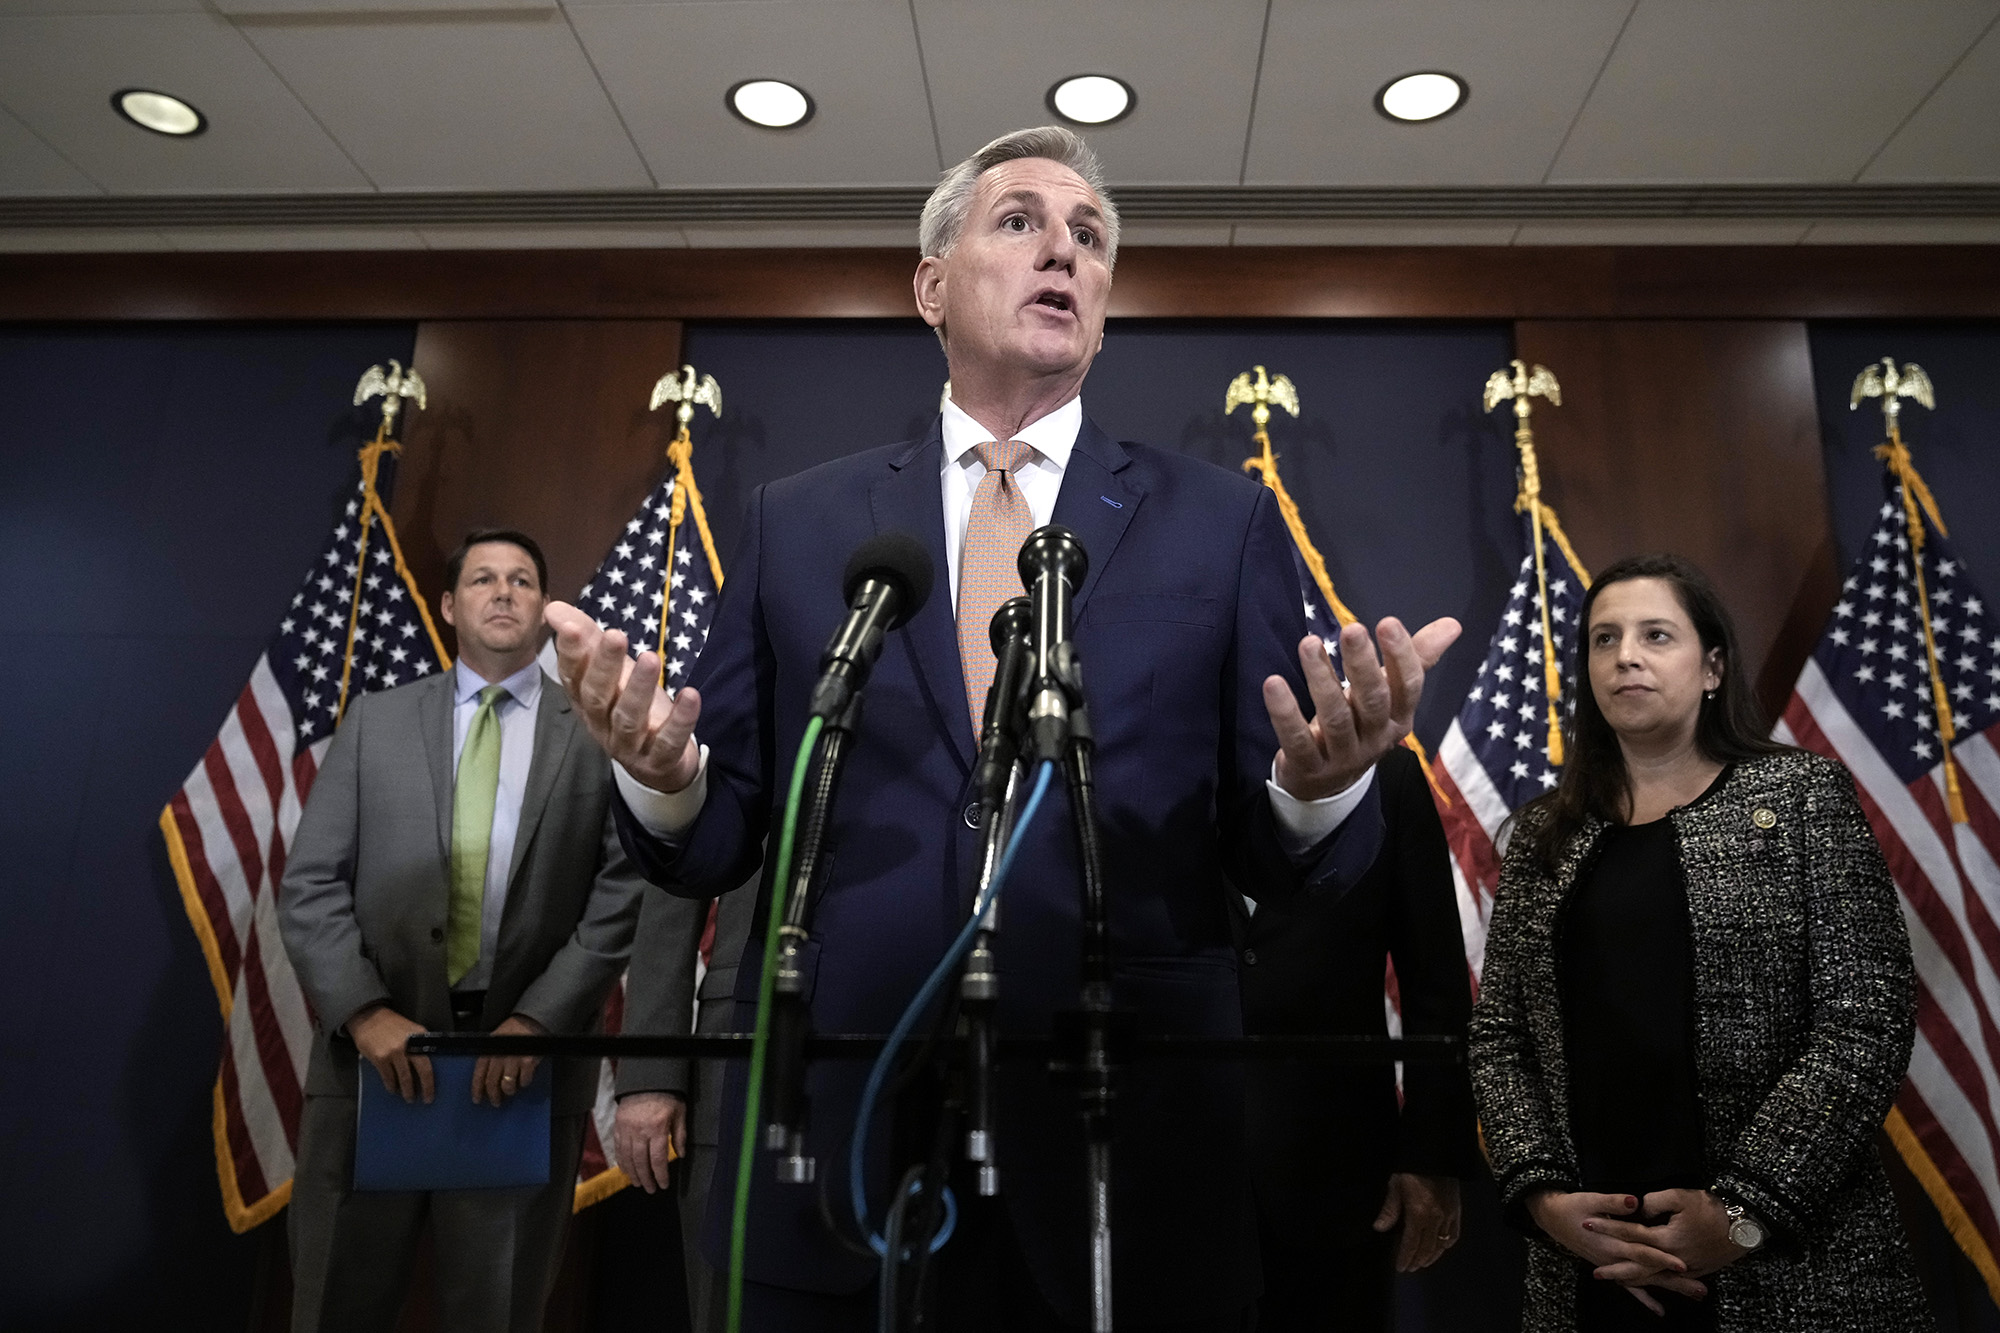 Speaker of the House Kevin McCarthy (R-CA) speaks during a news conference after a budget briefing at the U.S. Capitol March 8, in Washington, DC.